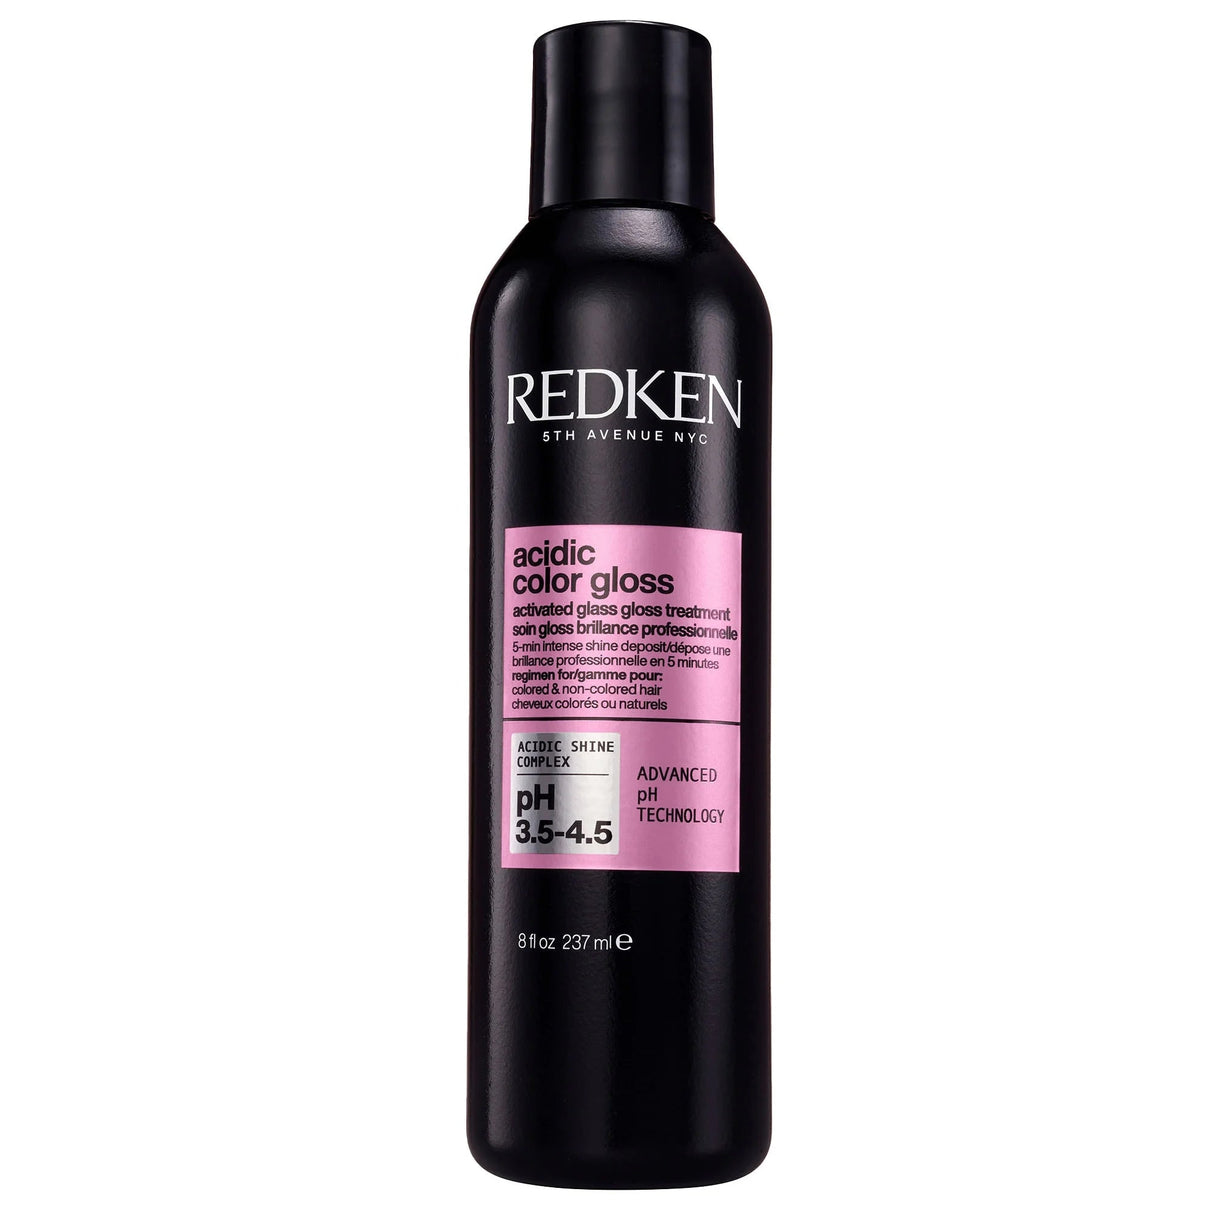 Acidic Color Gloss Activated Glass Gloss Treatment-Redken